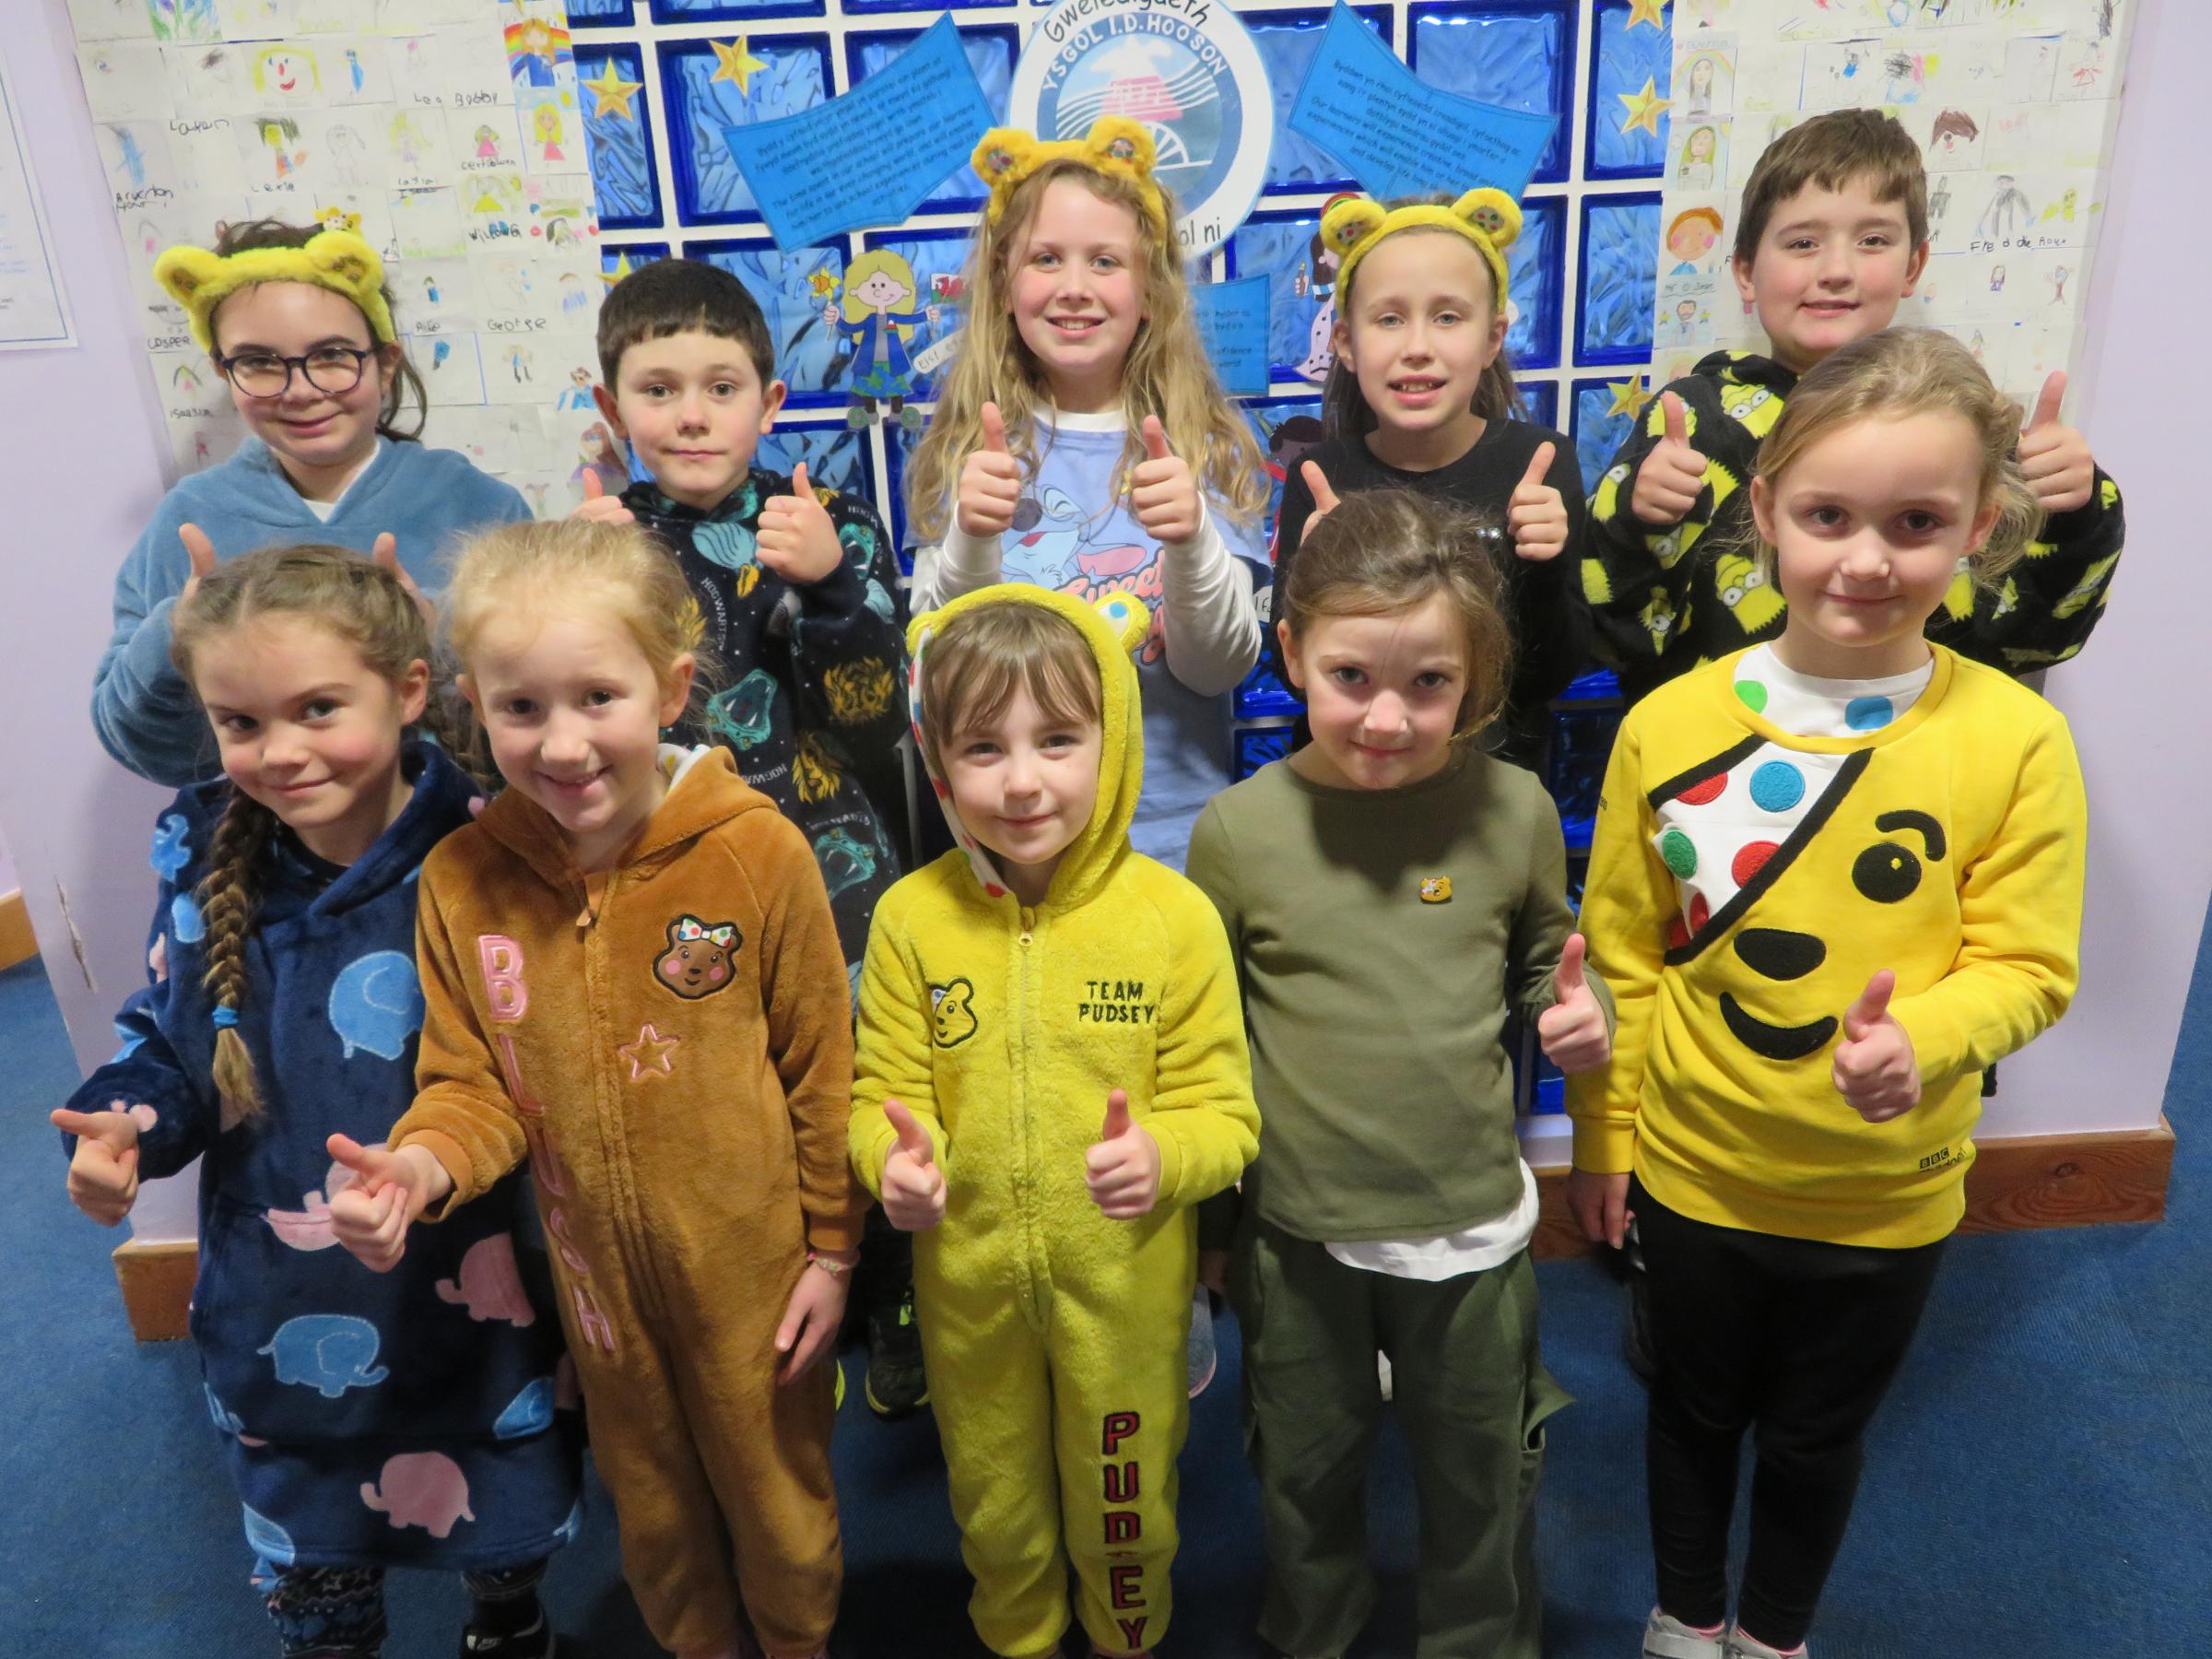 Putting the fun into fundraising for Children in Need.